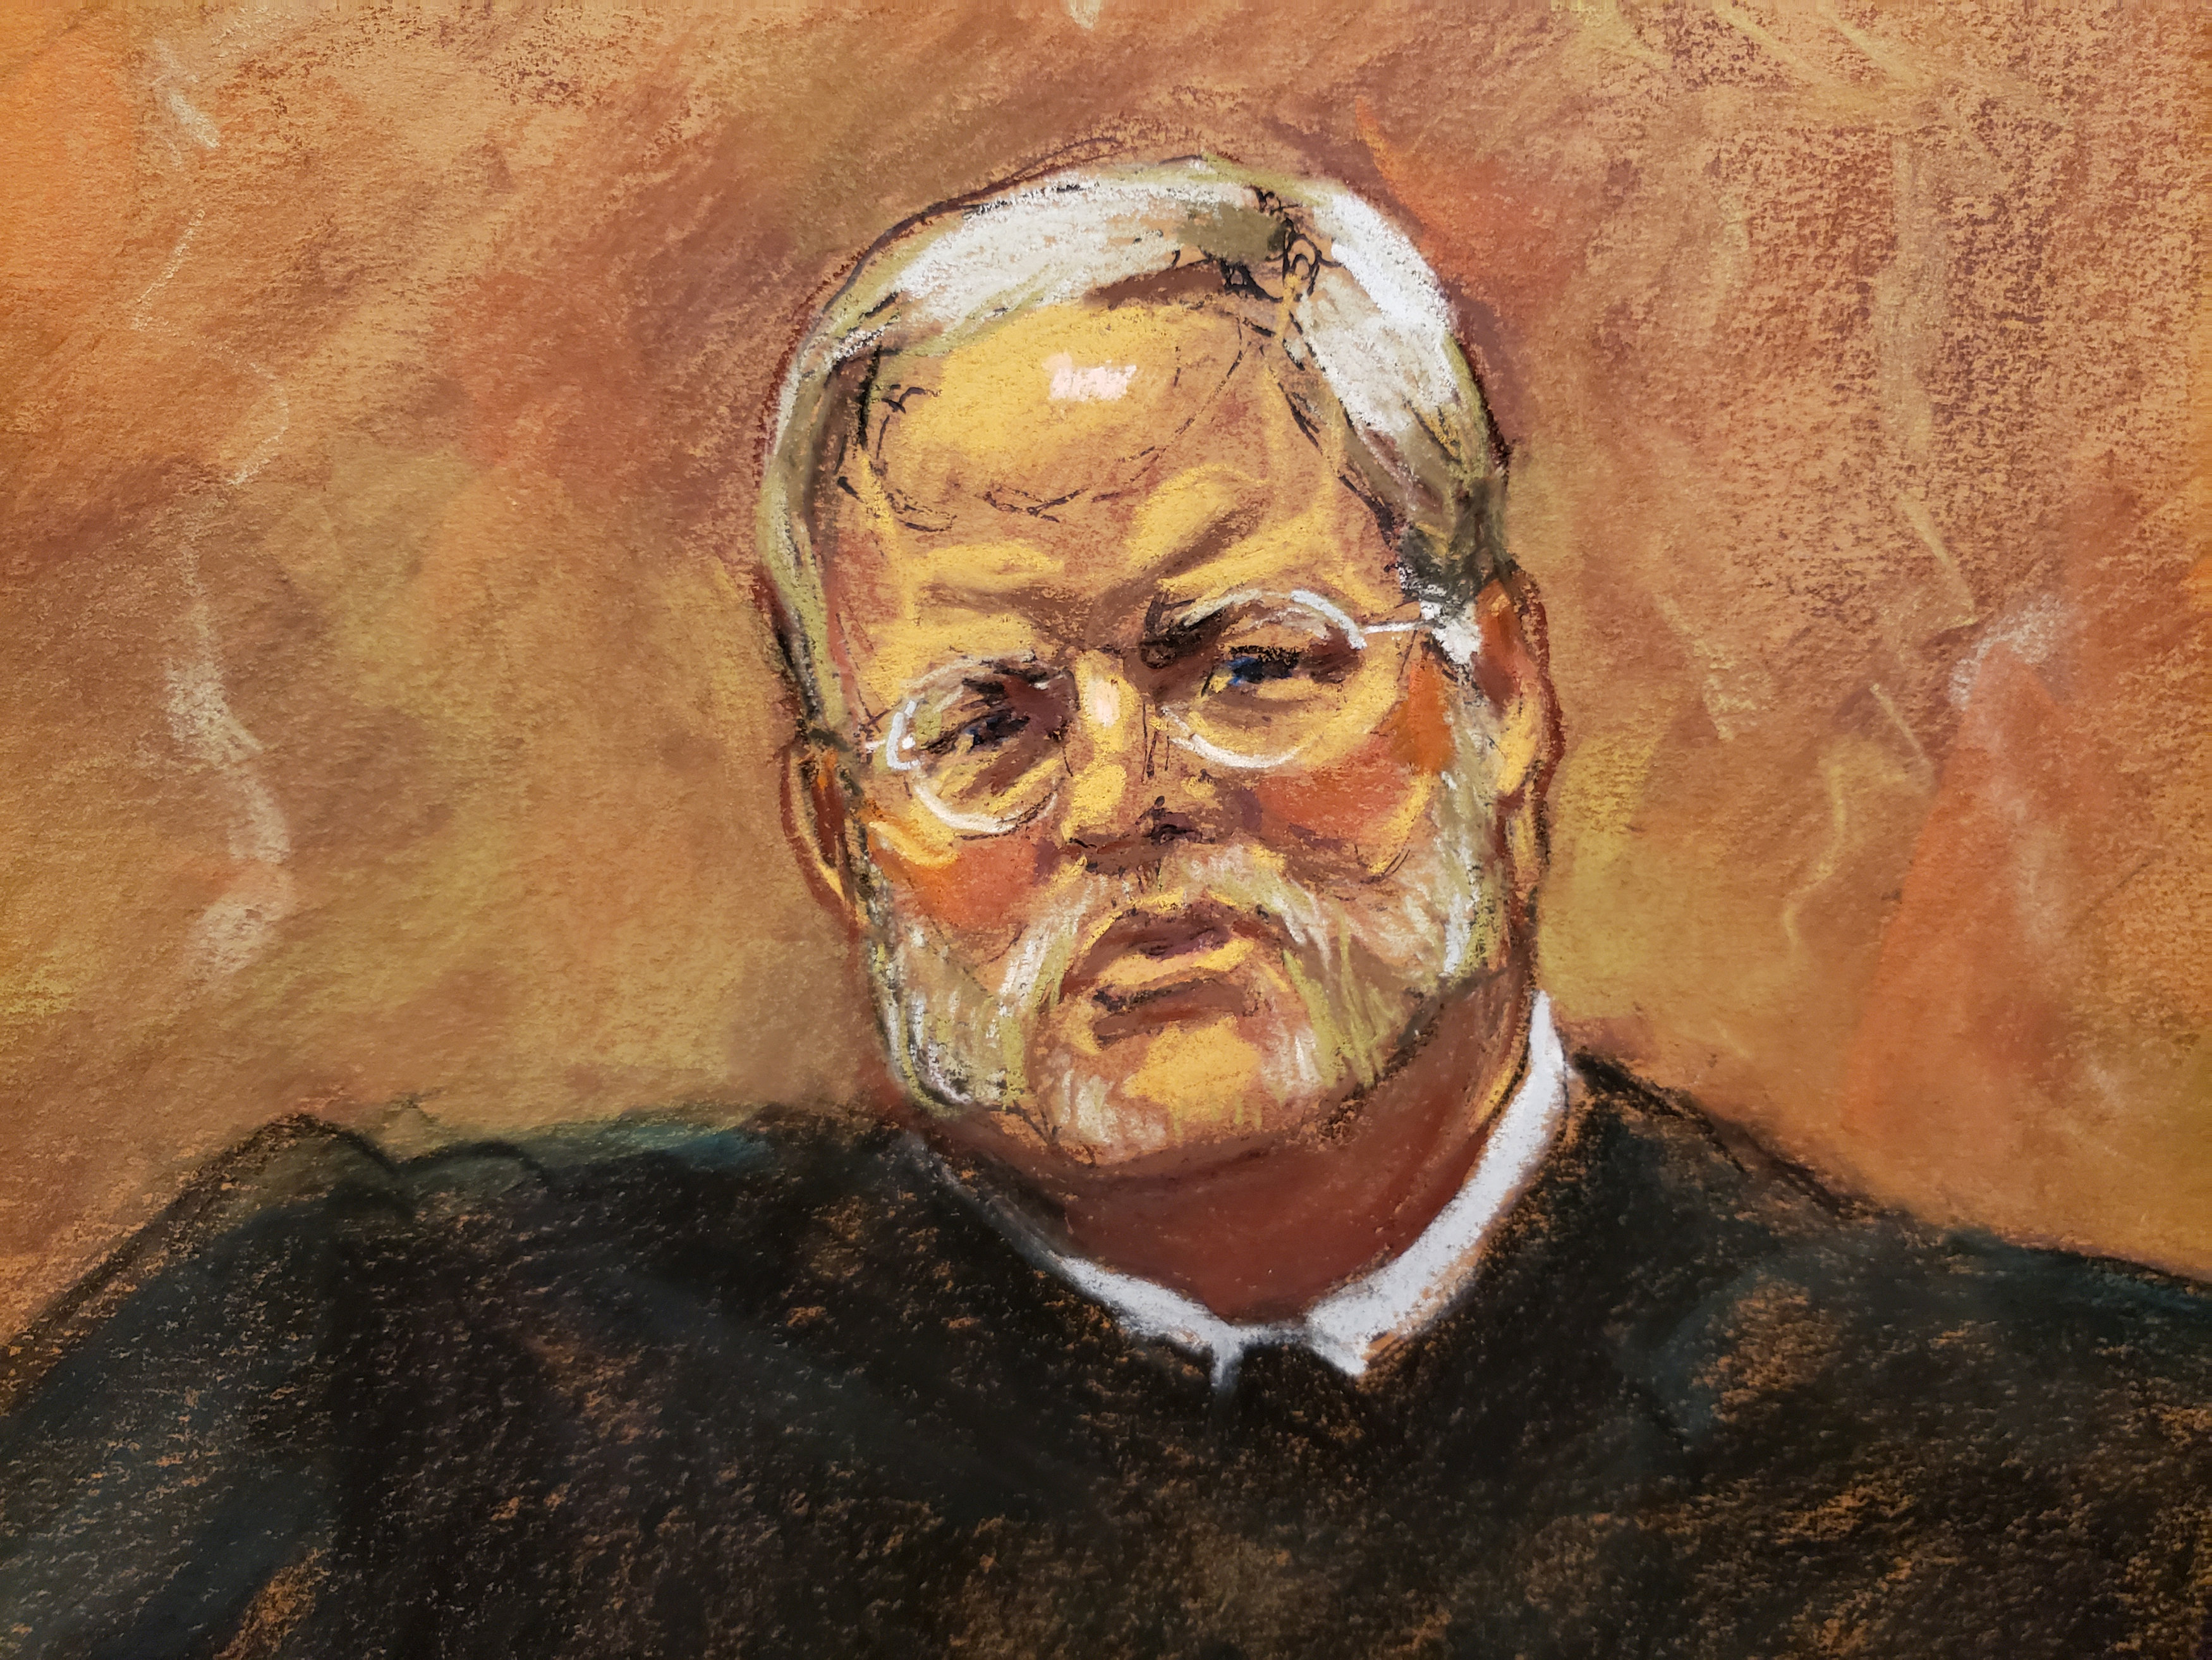 U.S. District Judge Brian Cogan is seen in this courtroom sketch, presiding on the day the accused Mexican drug lord Joaquin "El Chapo" Guzman was found guilty of smuggling tons of drugs to the United States, in Brooklyn federal court in New York, U.S., February 12, 2019.   REUTERS/Jane Rosenberg   NO RESALES. NO ARCHIVES